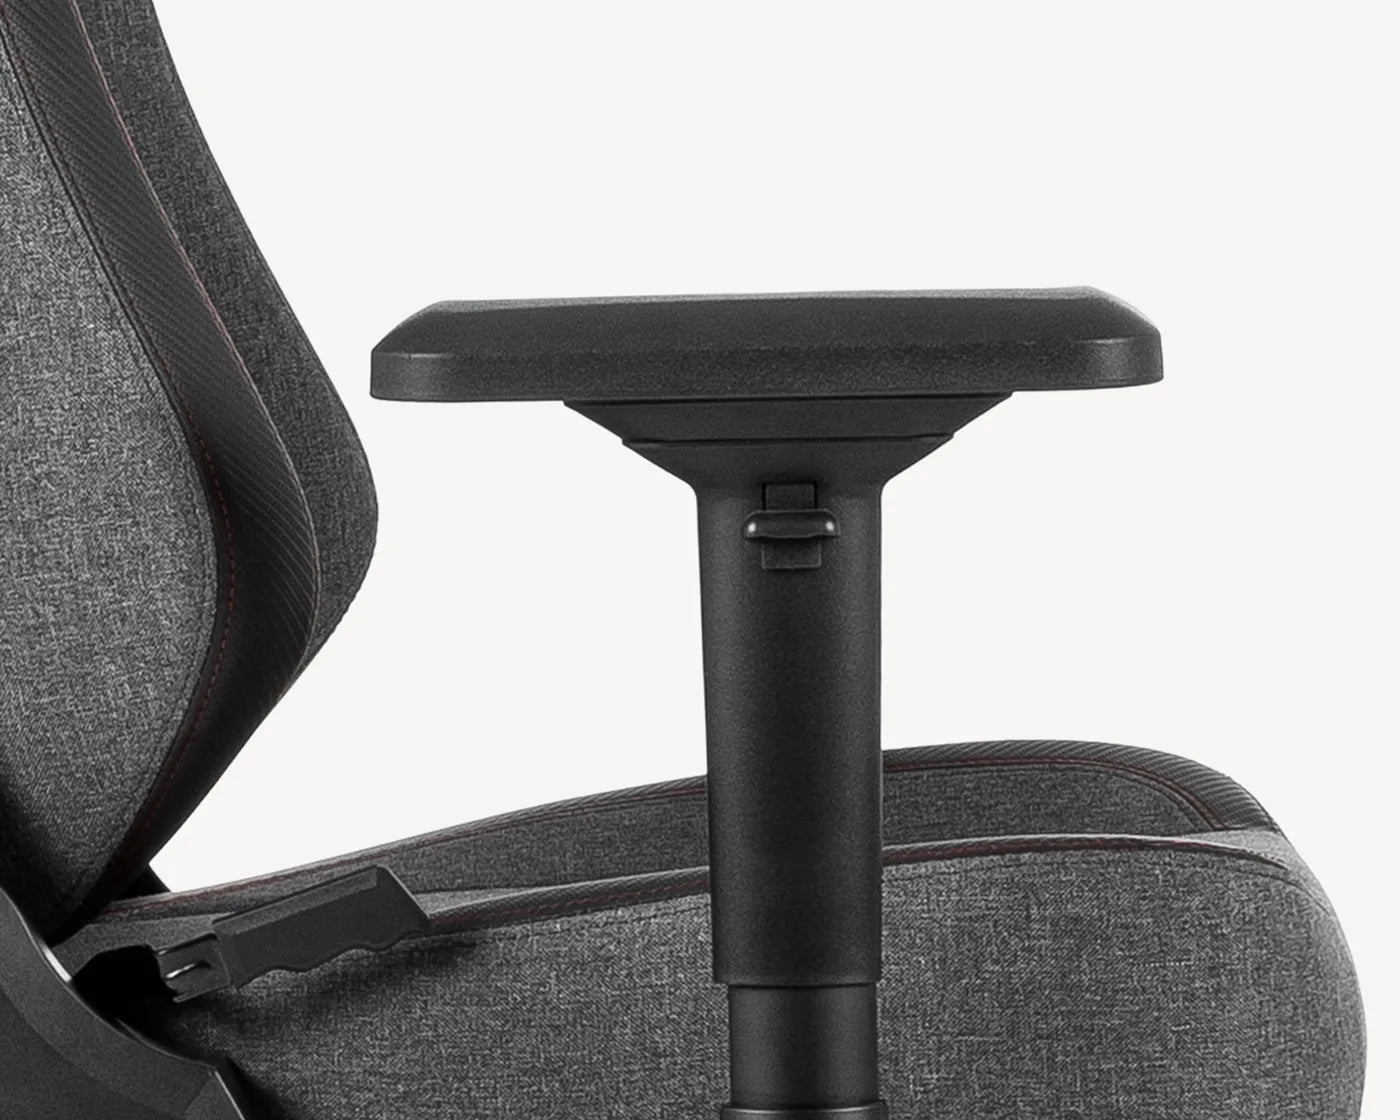 Close-up of a 4D armrest on a grey gaming chair providing multi-directional support, as part of TRITON's ergonomic chair features.